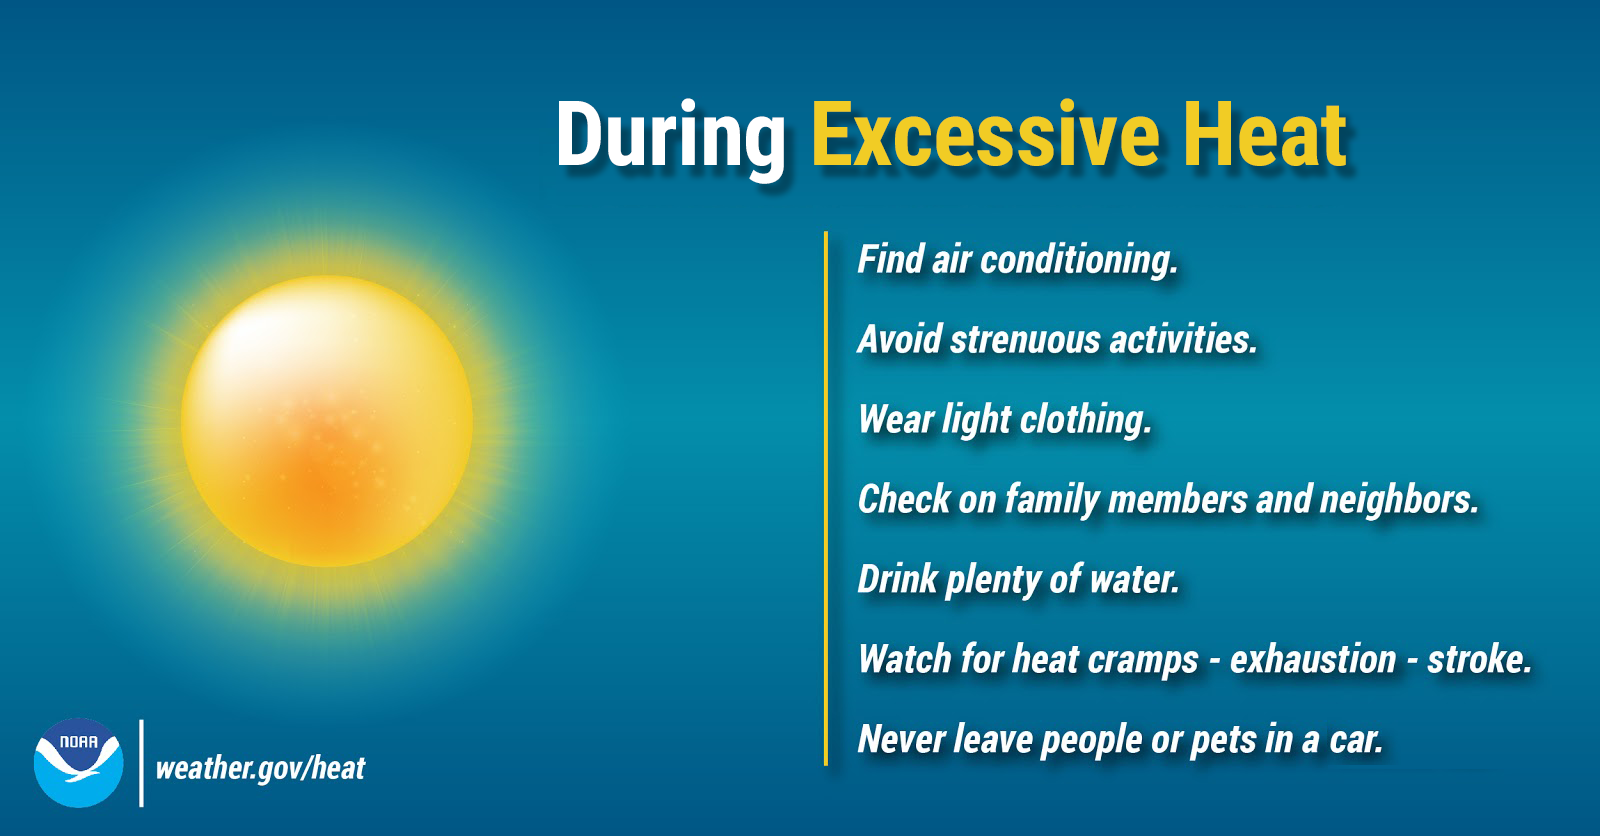 During Excessive Heat: Find air conditioning. Avoid strenuous activities. Wear light clothing. Check on family members and neighbors. Drink plenty of water. Watch for heat cramps, exhaustion, and stroke. Never leave people or pets in a closed car.